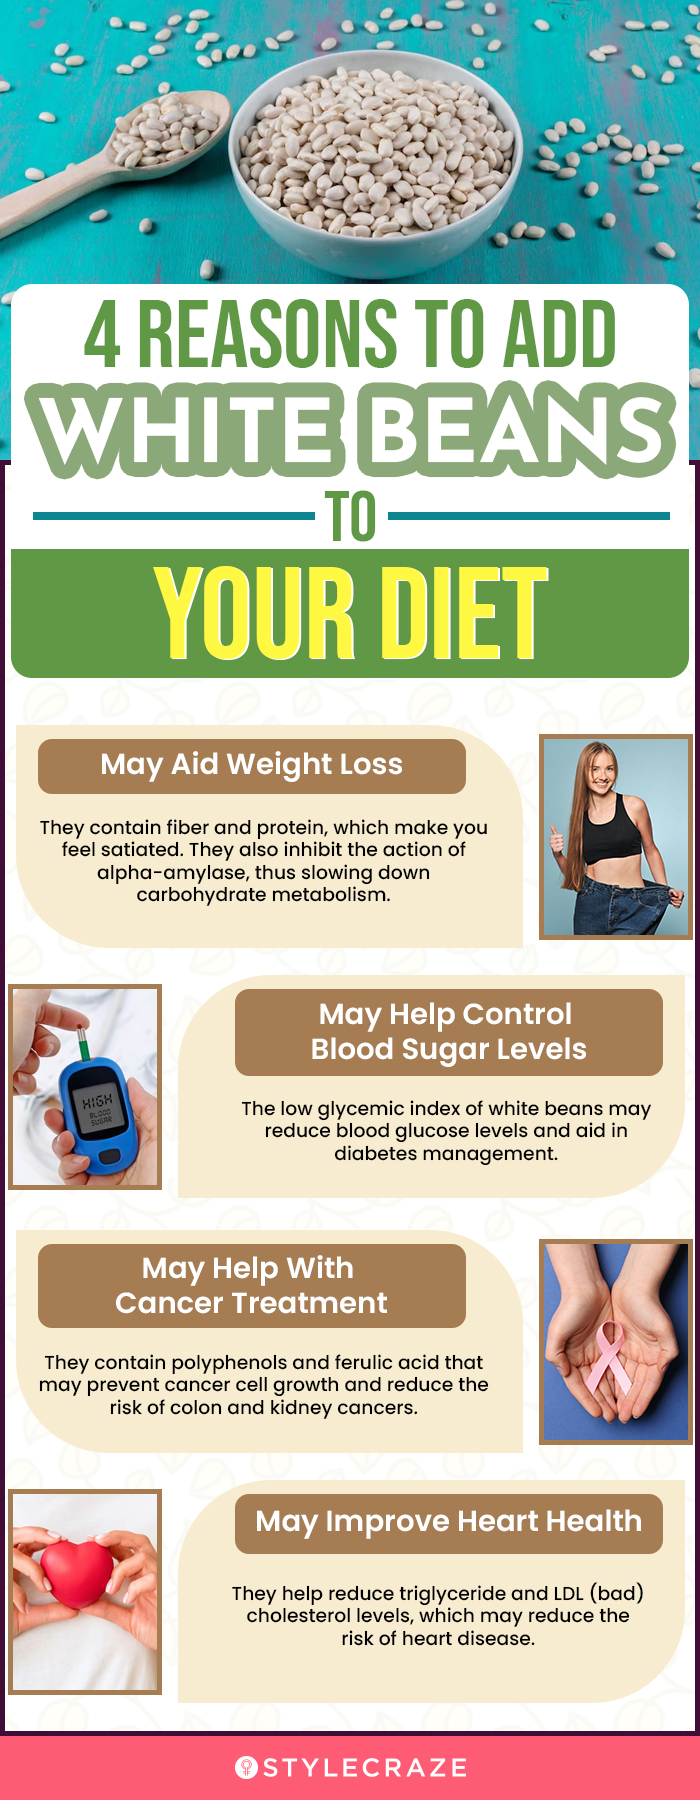 4 reasons for adding white beans to your diet (infographic)